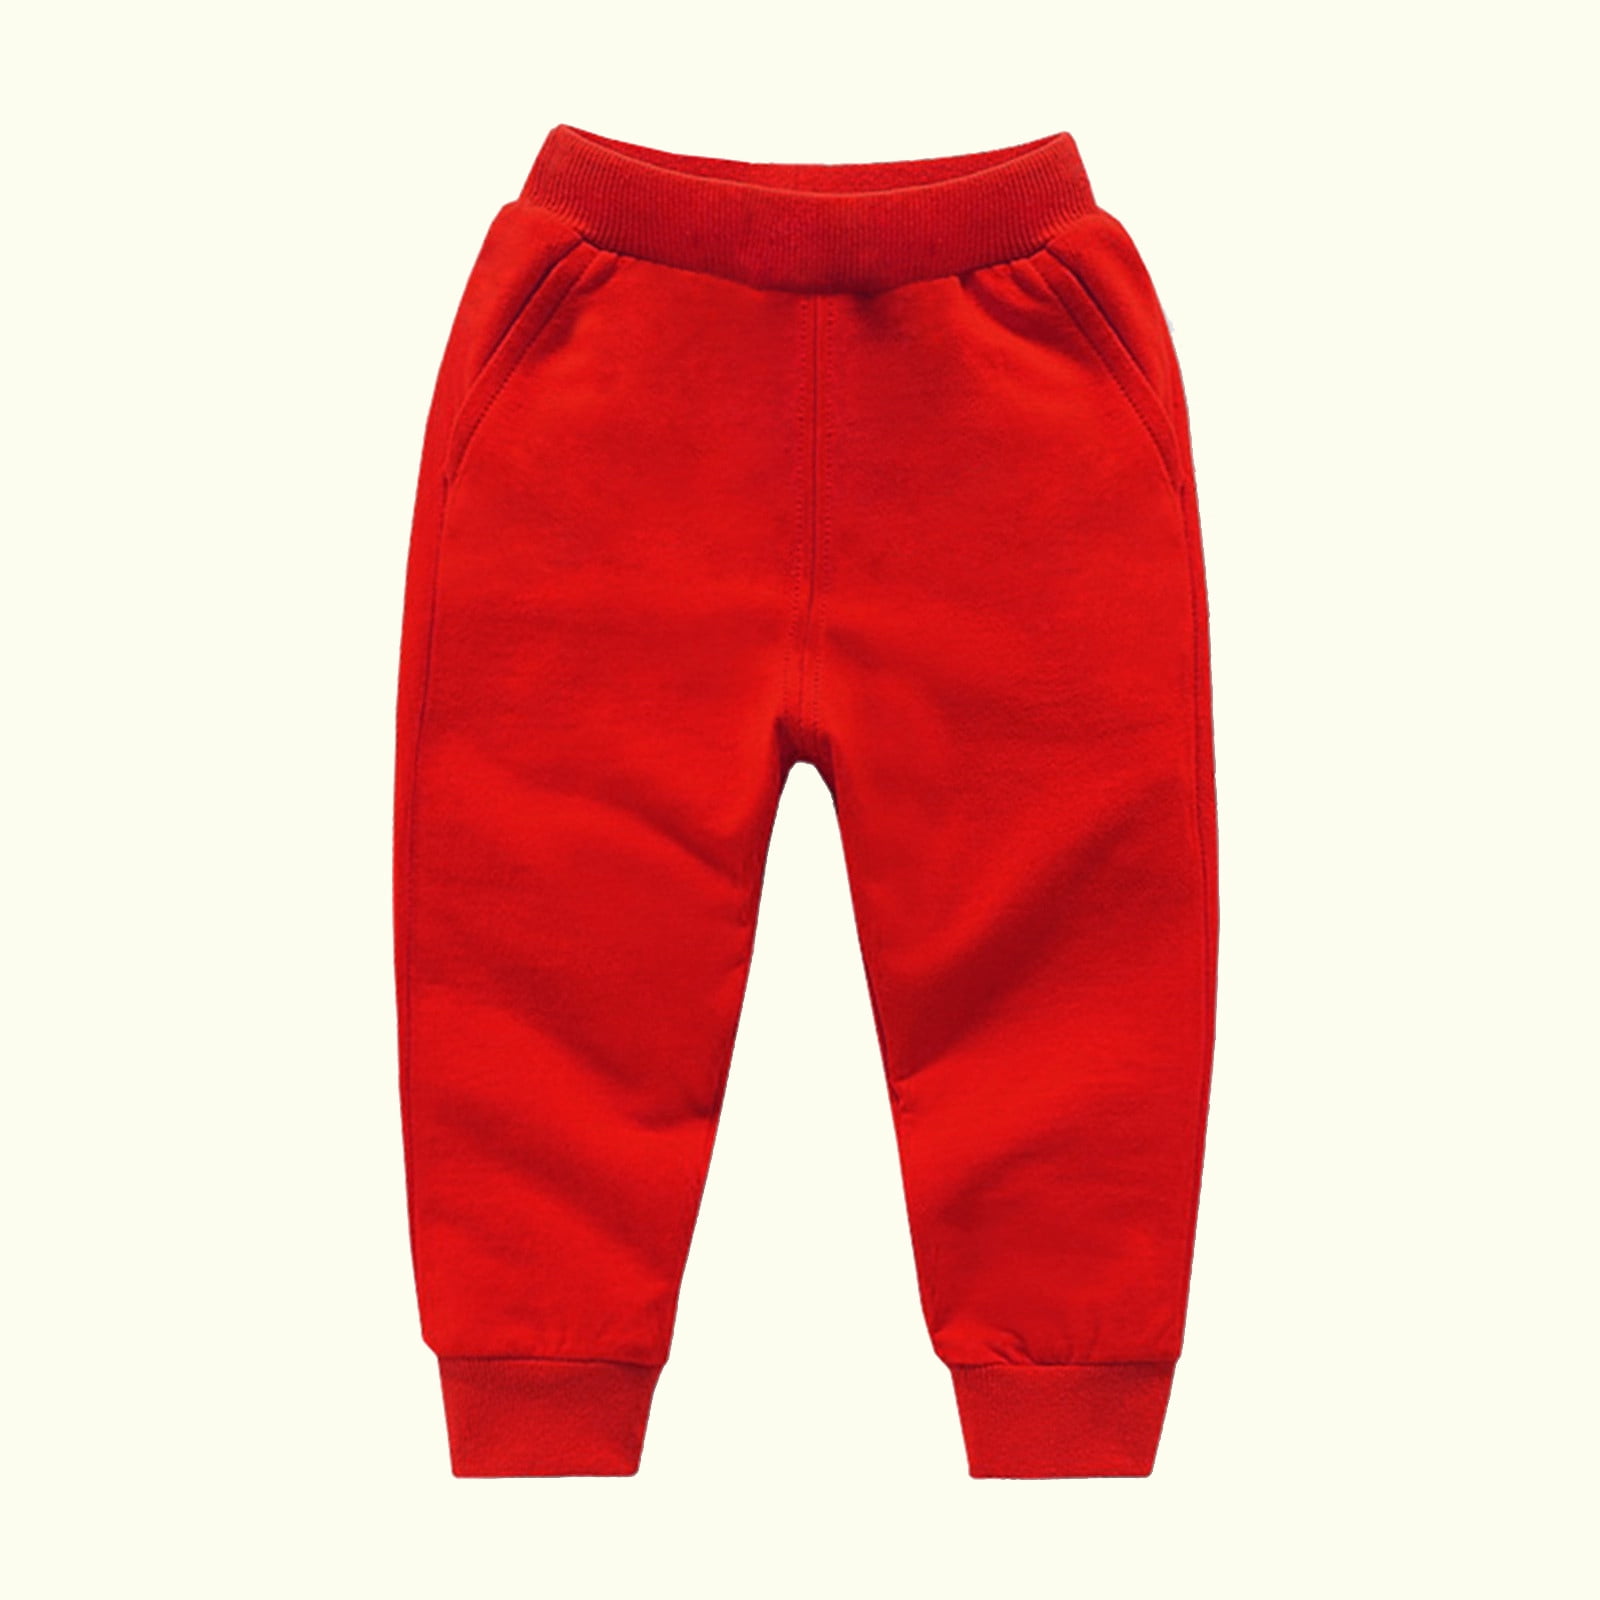 Shldybc Toddler Baby Boys Girls Sweatpants Candy Color Solid Color Leggings  Casual Kids Sport Joggers Casual Active Athletic Pants( Red, 12-18 Months )  